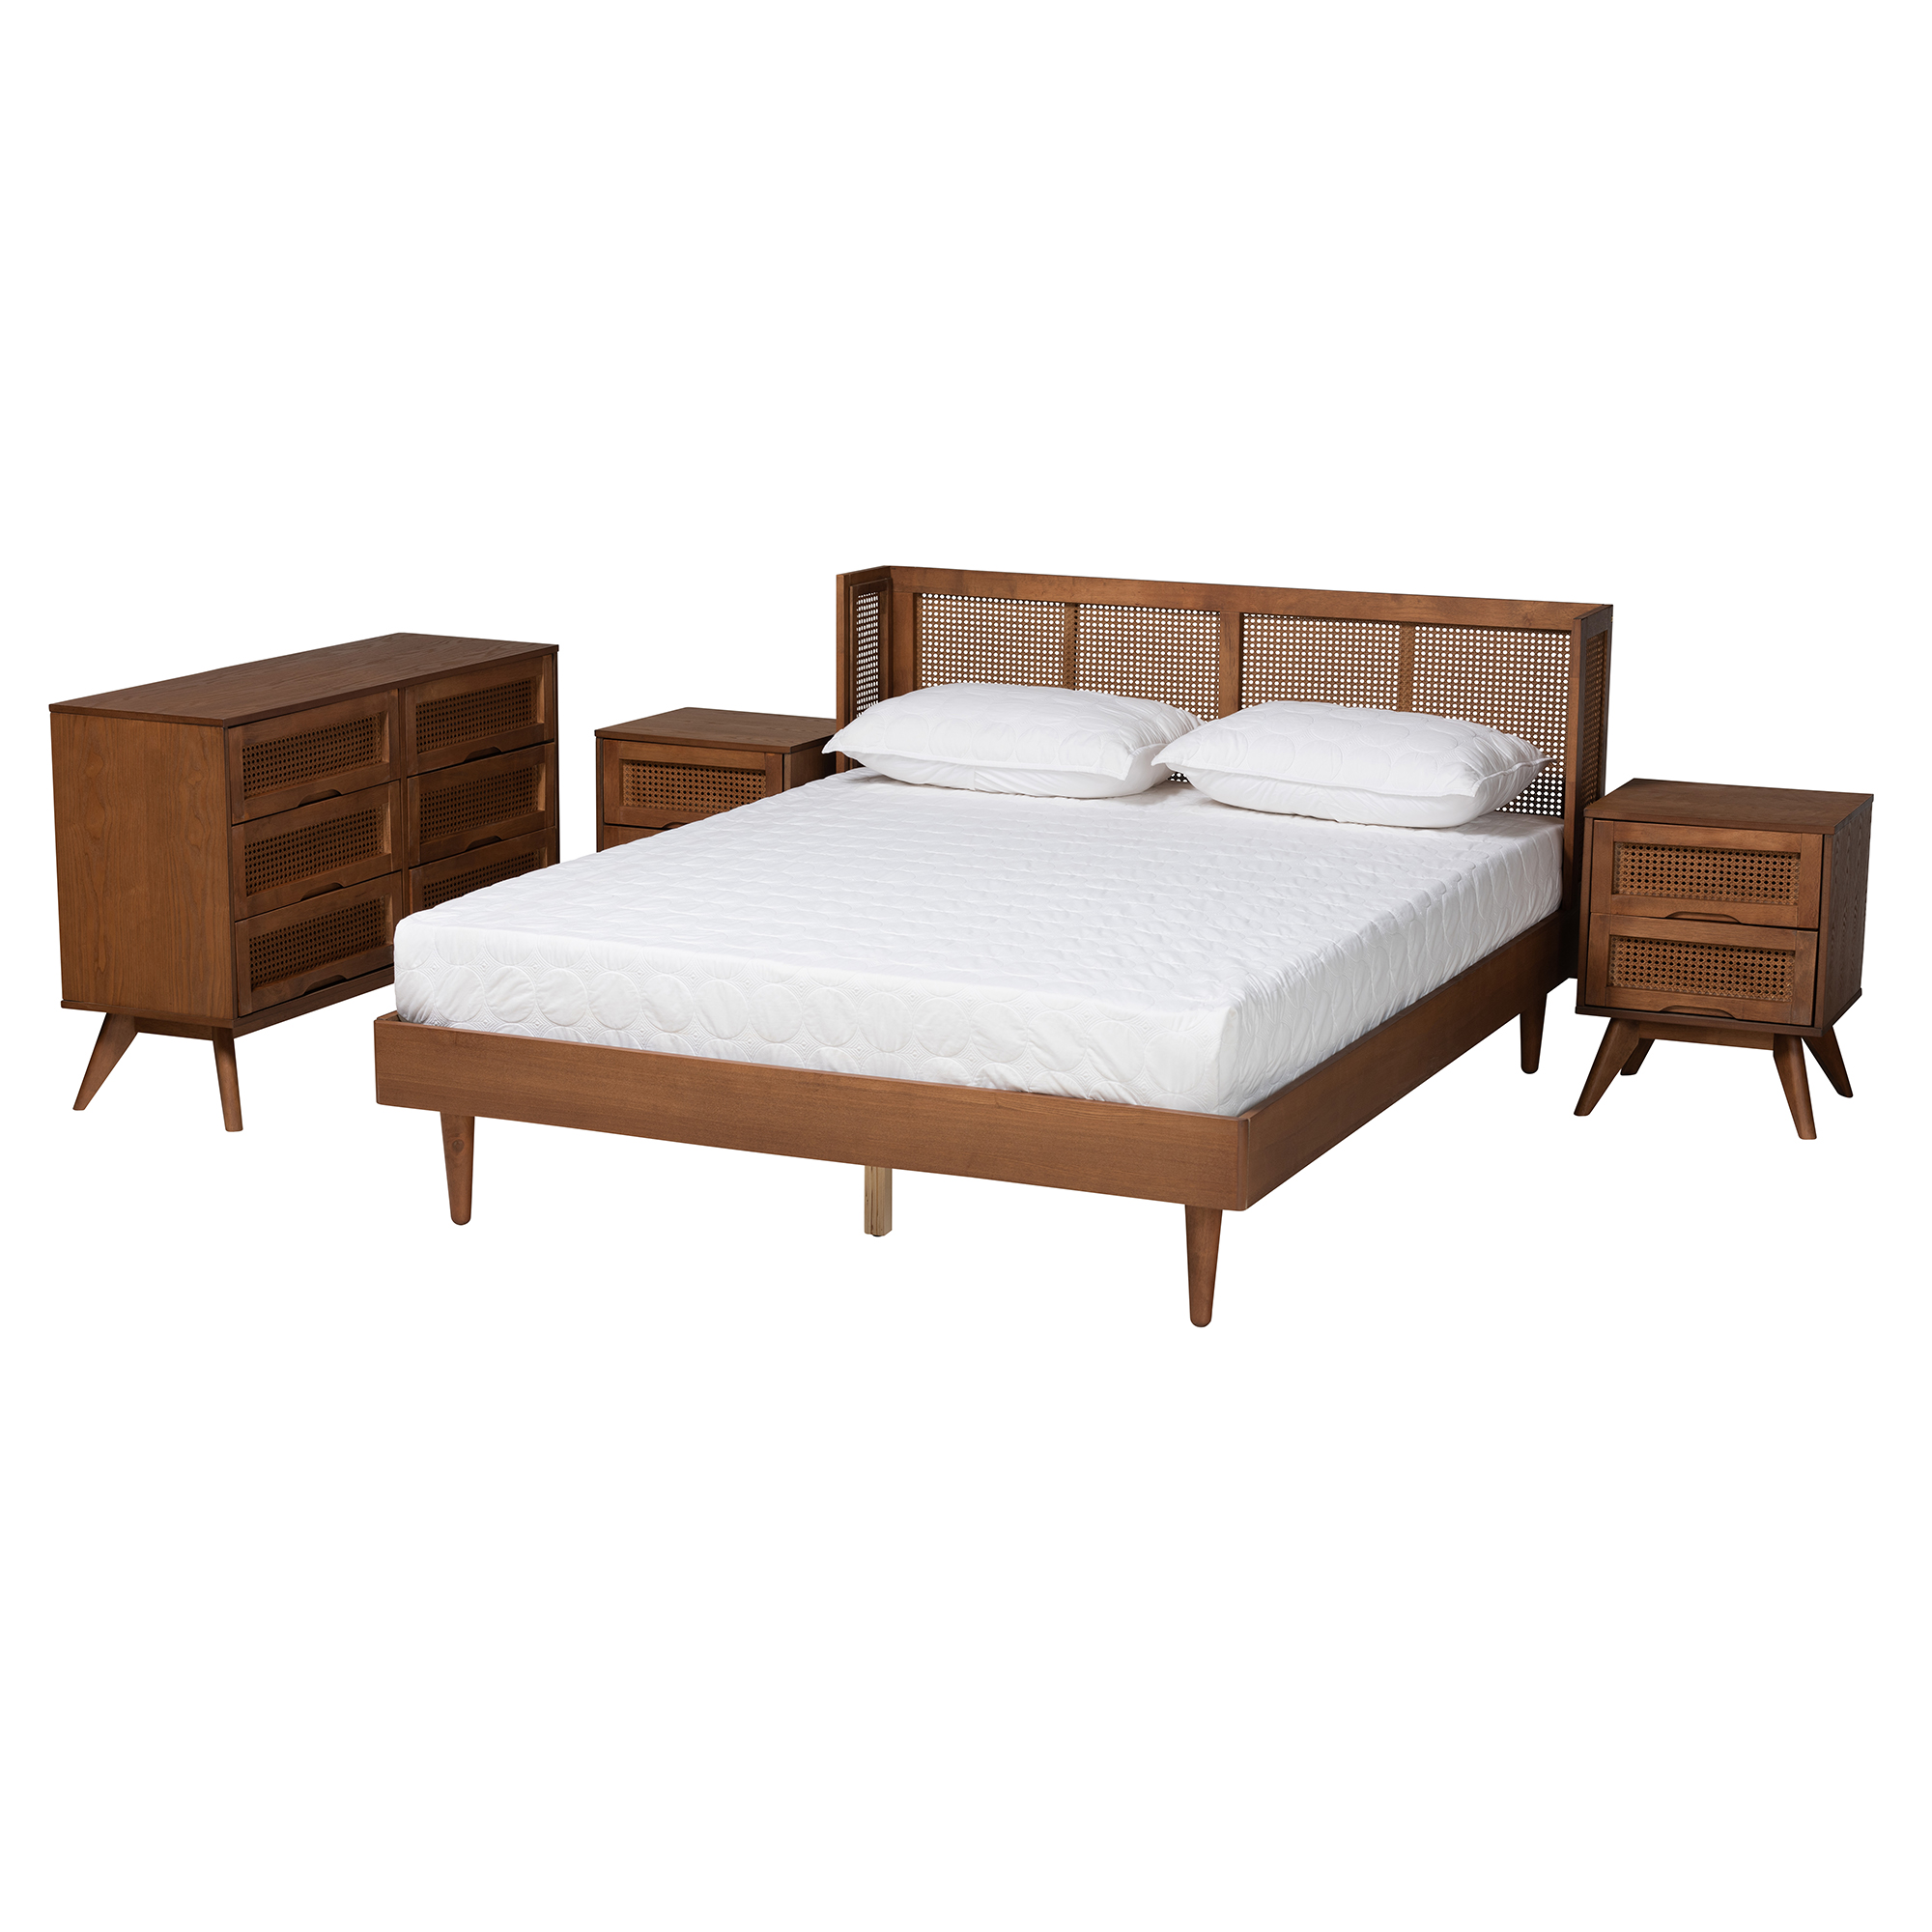 Baxton Studio Rina Mid-Century Modern Ash Walnut Finished Wood 4-Piece Queen Size Bedroom Set with Synthetic Rattan